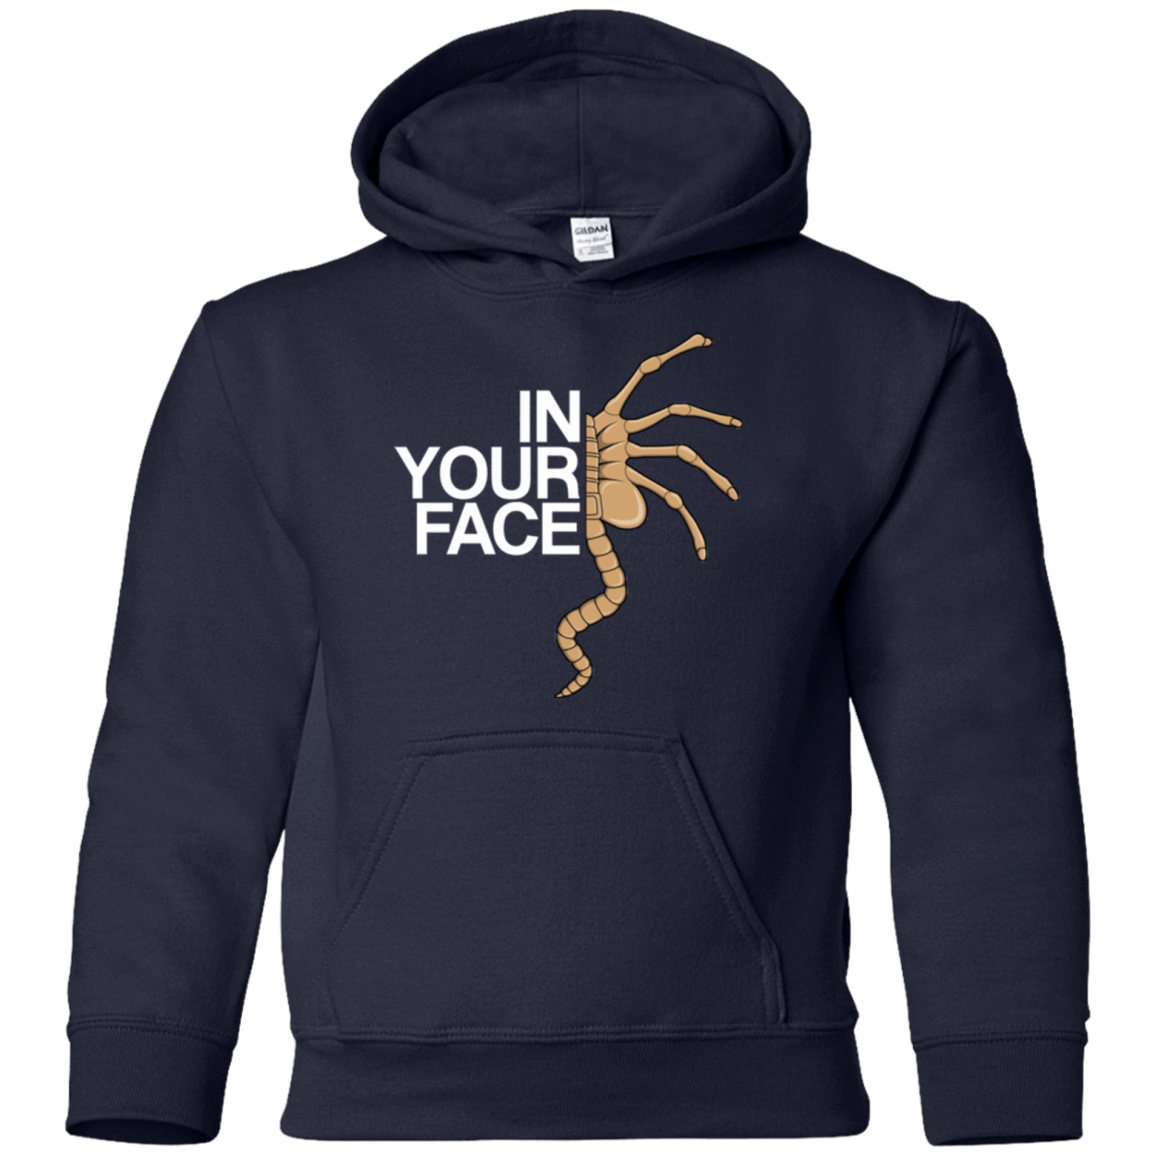 IN YOUR FACE Youth Hoodie